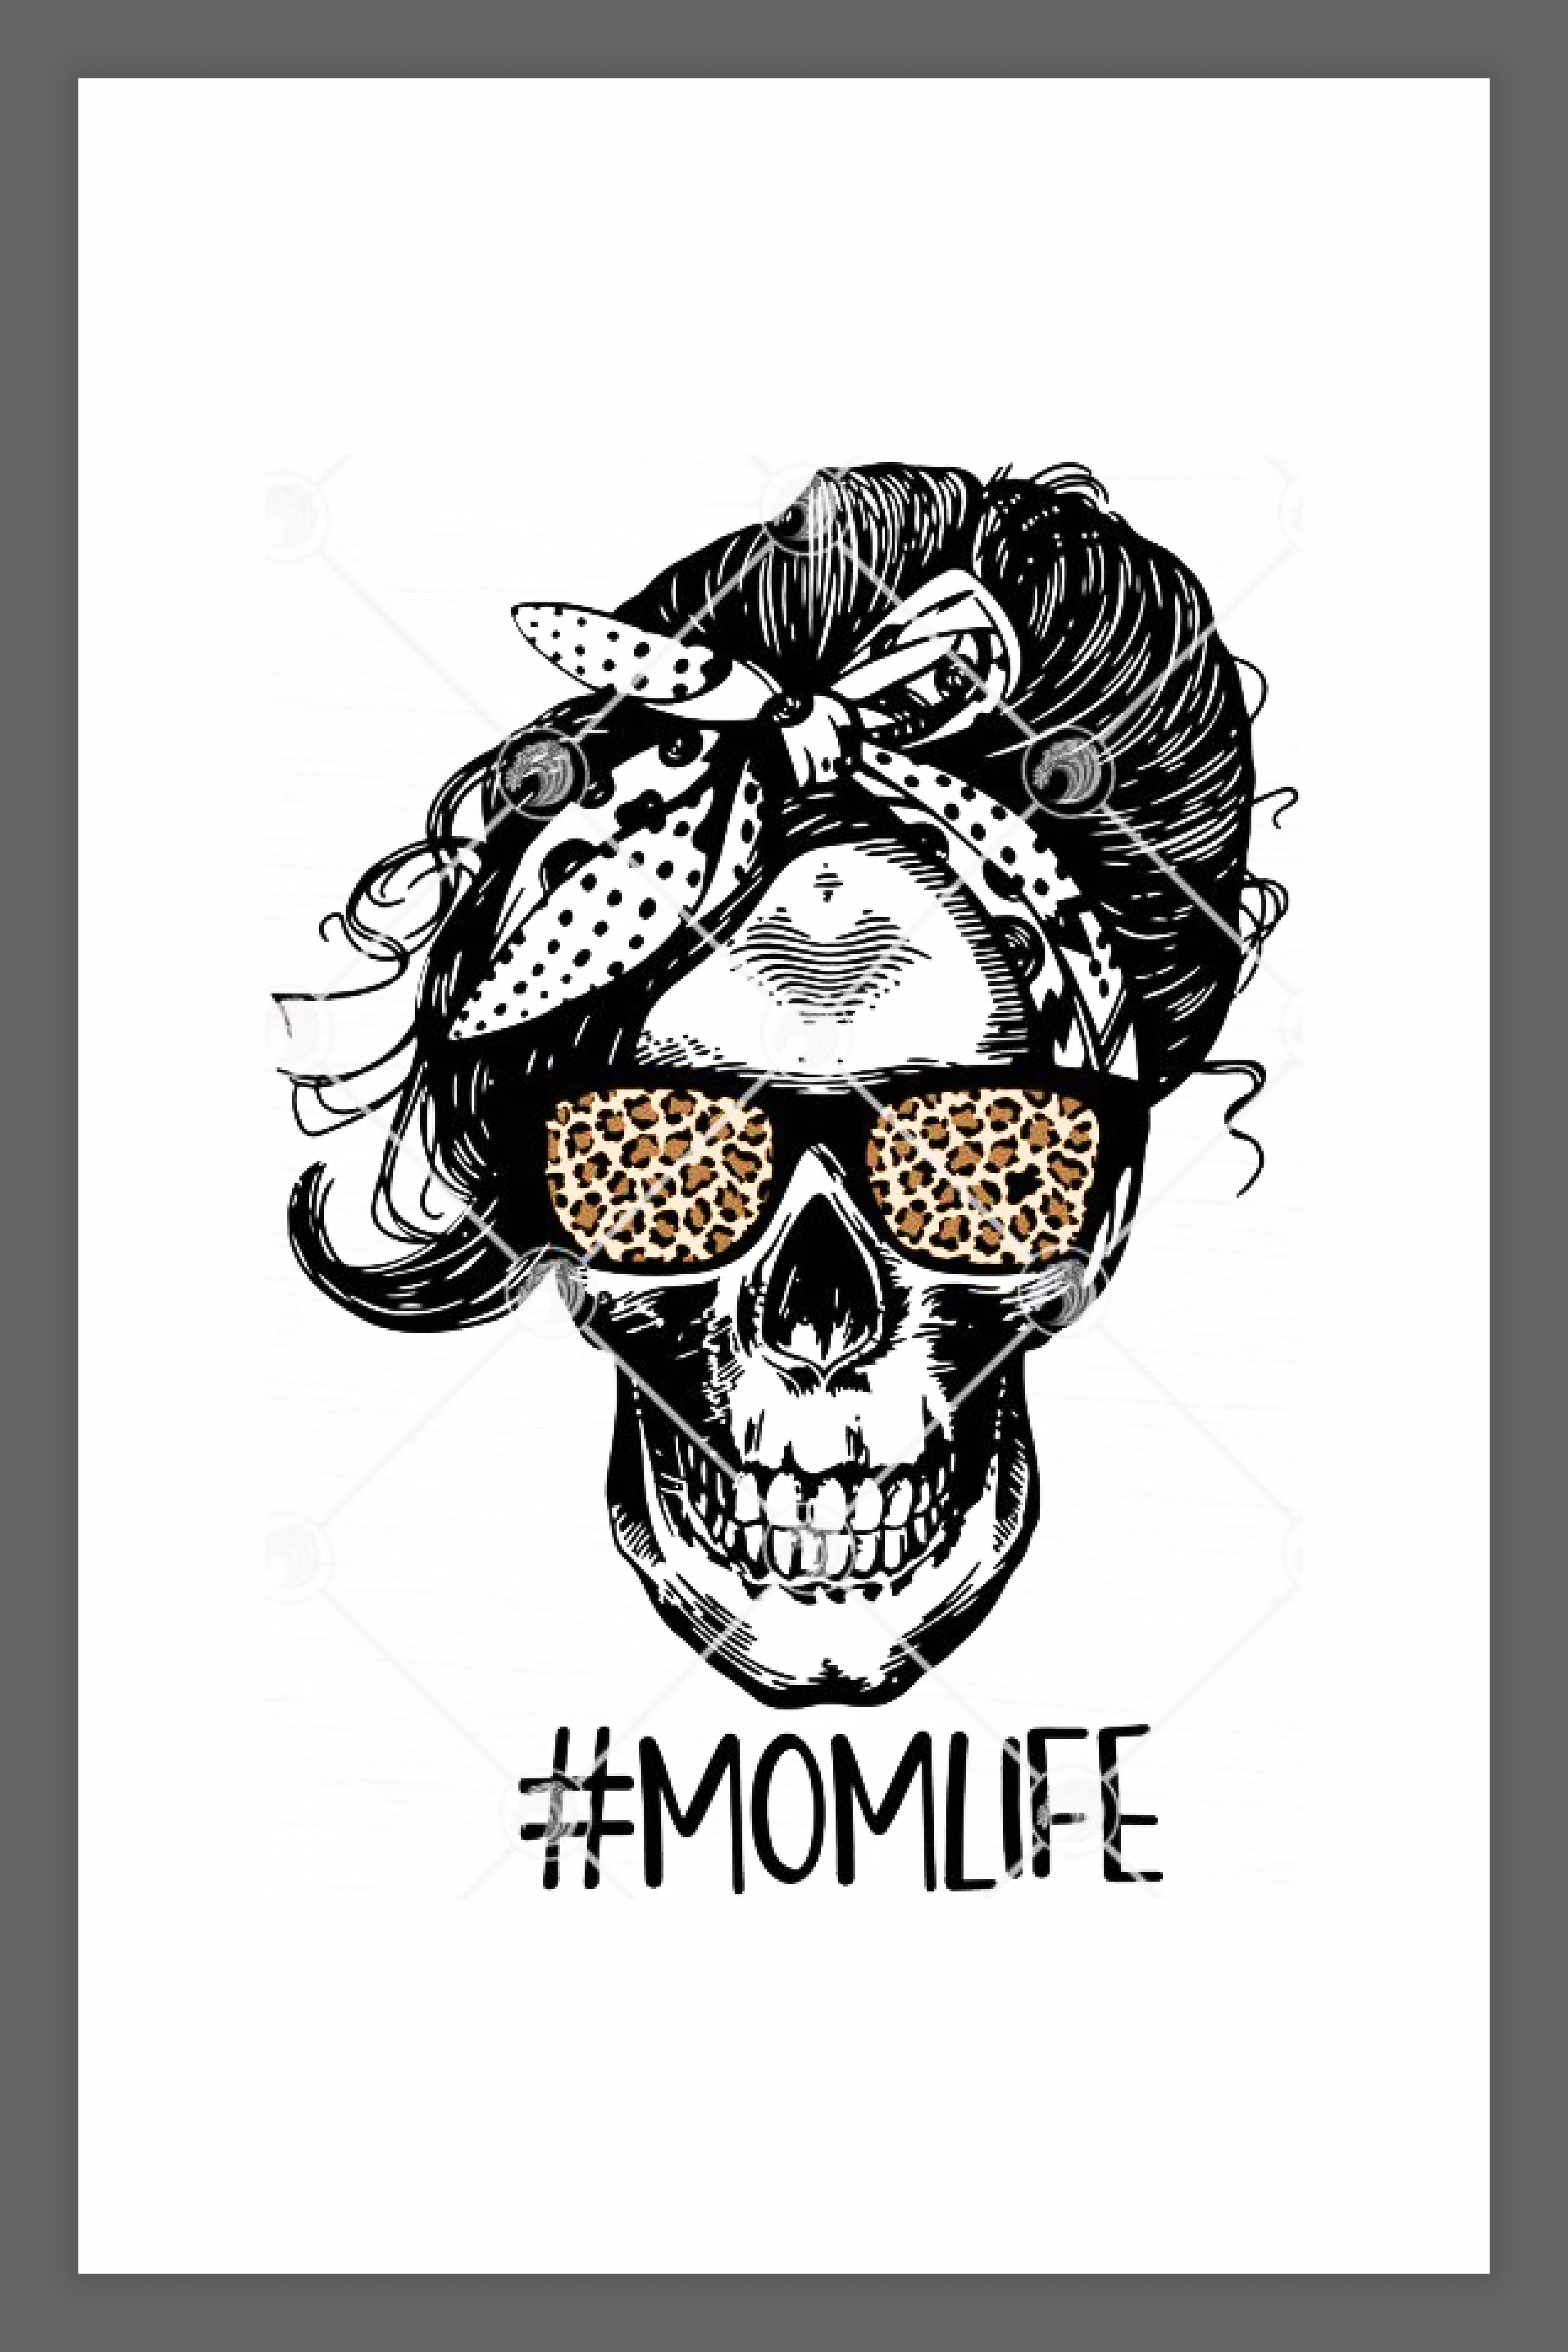 Image of a skull with a hairstyle, a scarf and glasses with leopard glasses.